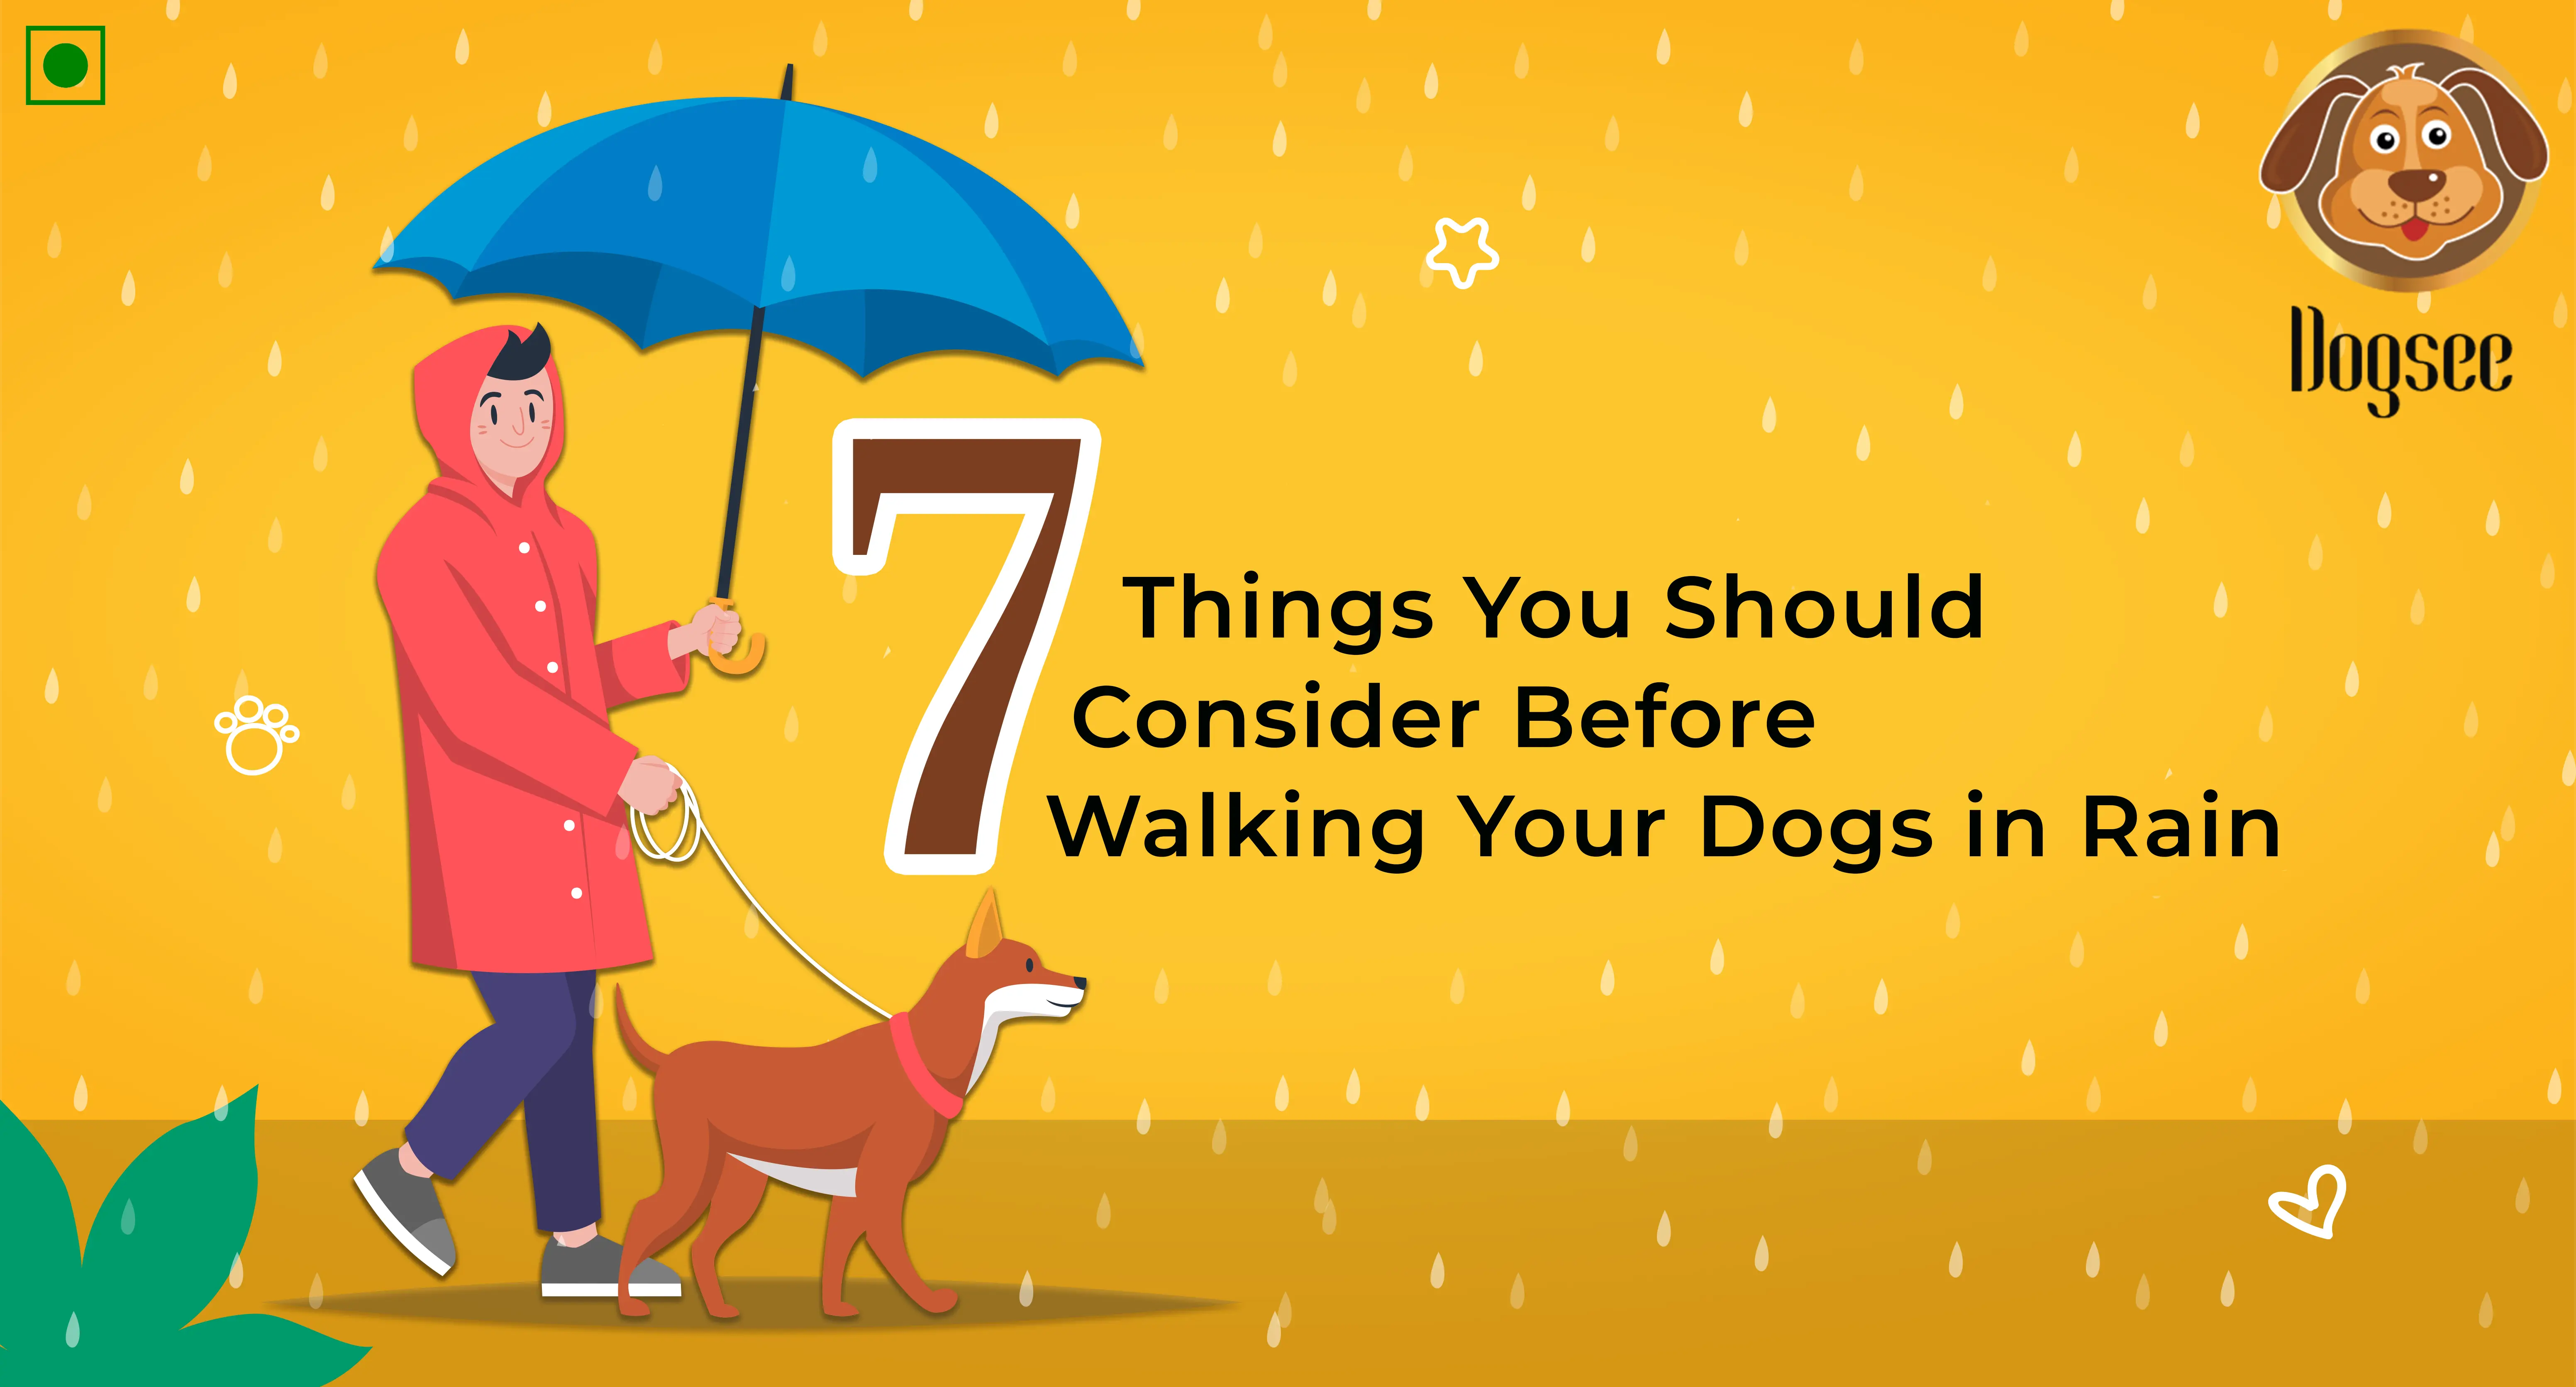 7 Things You Should Consider Before Walking Your Dogs in Rain